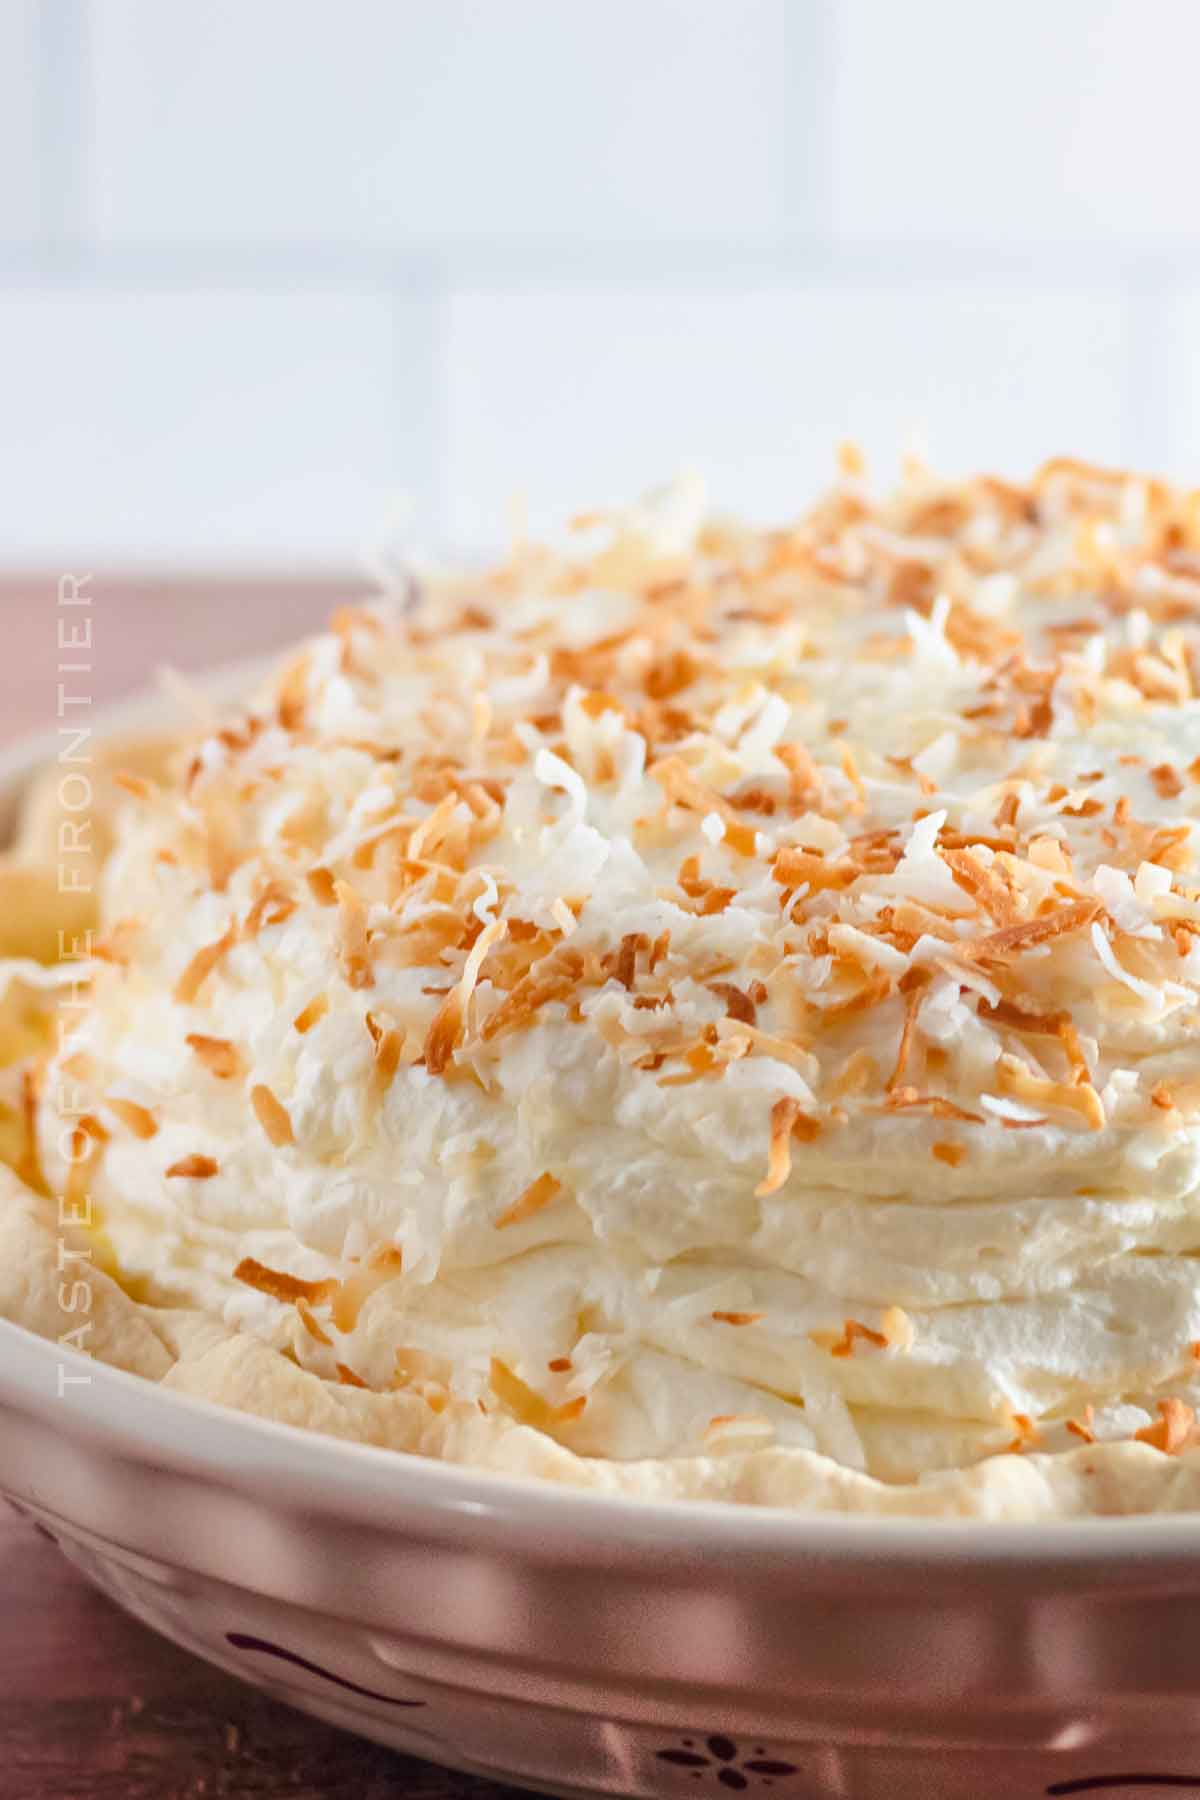 Coconut Cream Pie with Toasted Coconut